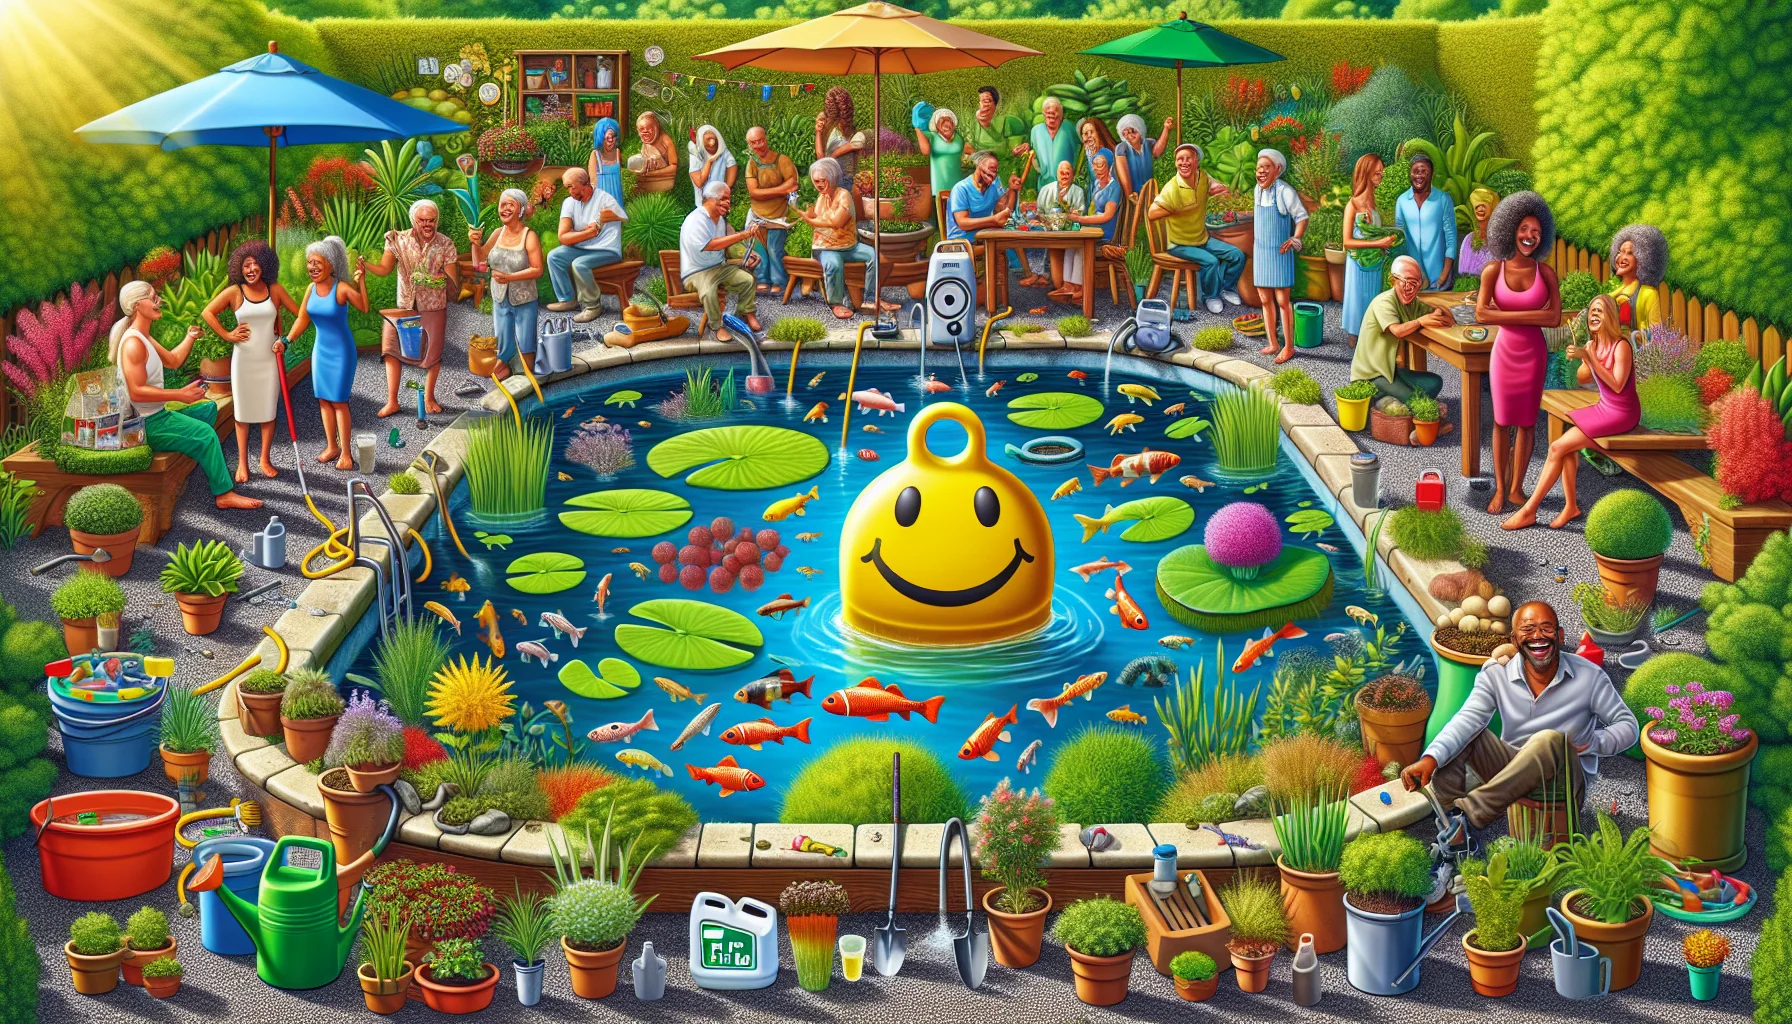 A humorous gardening scenario that illustrates pond pH balance tips. In the center of this image is a vibrant, well-maintained garden pond full of different aquatic plants, glistening under the warmth of a sunny day. The pond's water is crystal clear and the pH balance is indicated by a floatable buoy with a happy face, showing an ideal pH level. A diverse group of people of different genders and descents, such as Black, Middle-Eastern, and South Asian, are gathered around, participating enthusiastically. They are engaged in various gardening activities while playfully interacting with oversized, caricatured gardening tools and products. This scene is designed to make gardening look enjoyable and appealing.